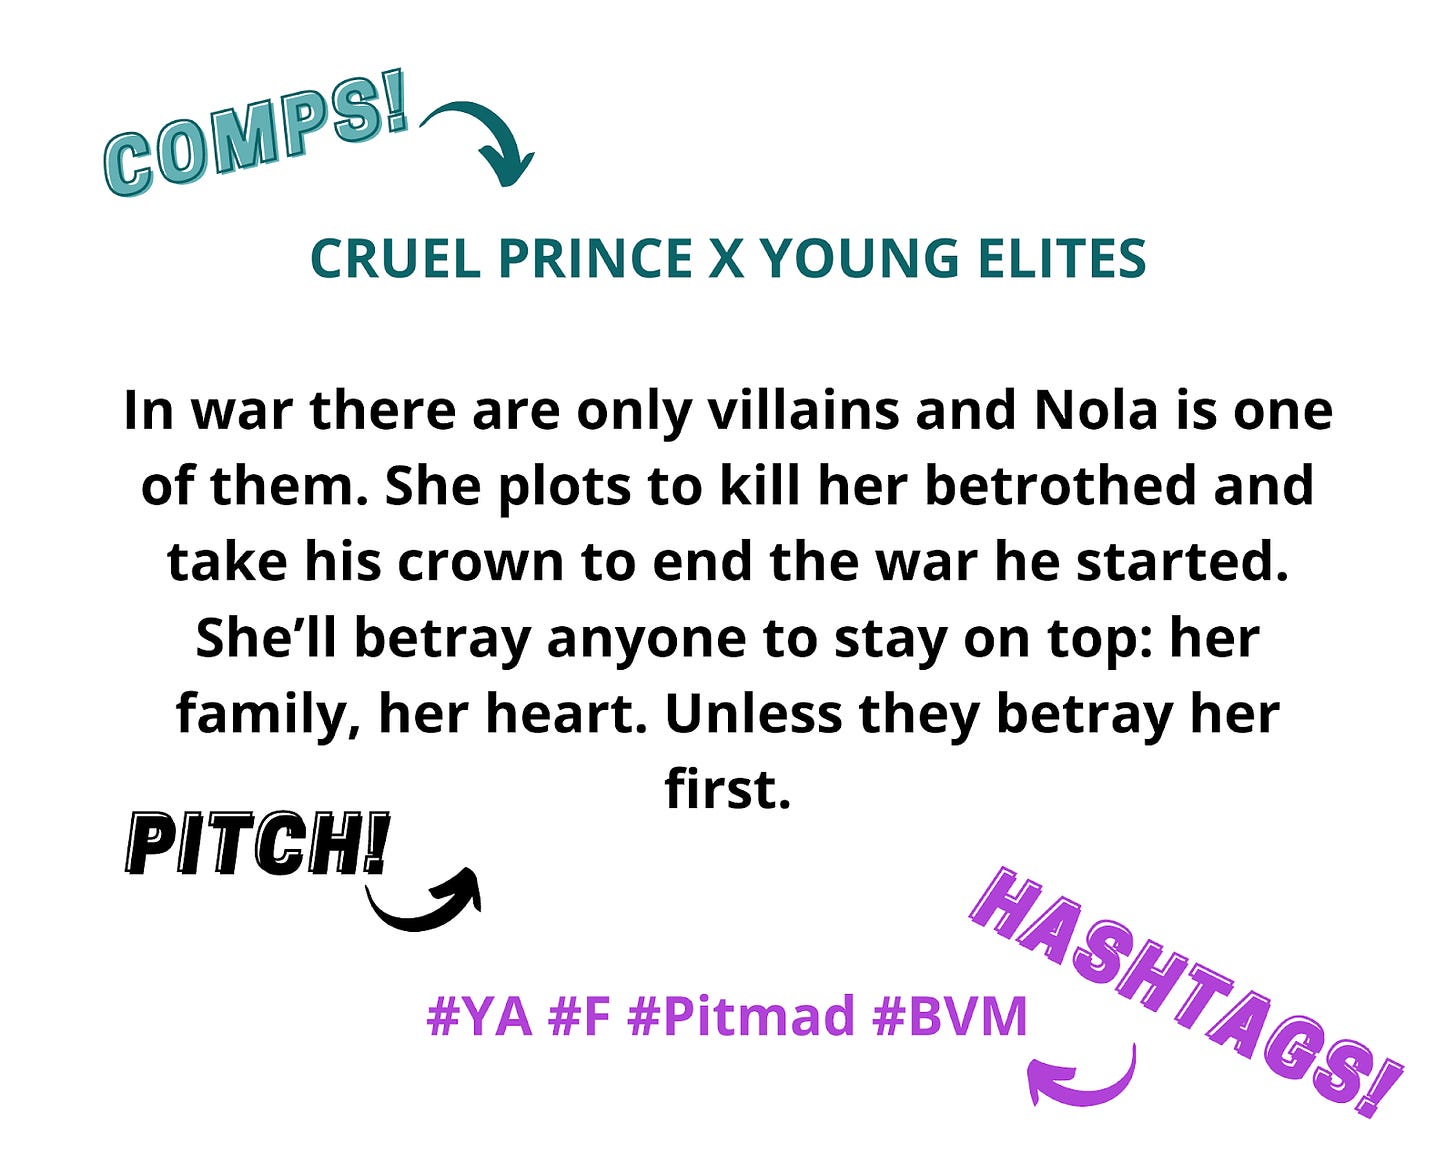 CRUEL PRINCE X YOUNG ELITES  In war there are only villains and Nola is one of them. She plots to kill her betrothed and take his crown to end the war he started. She’ll betray anyone to stay on top: her family, her heart. Unless they betray her first.   #YA #F #Pitmad #BVM